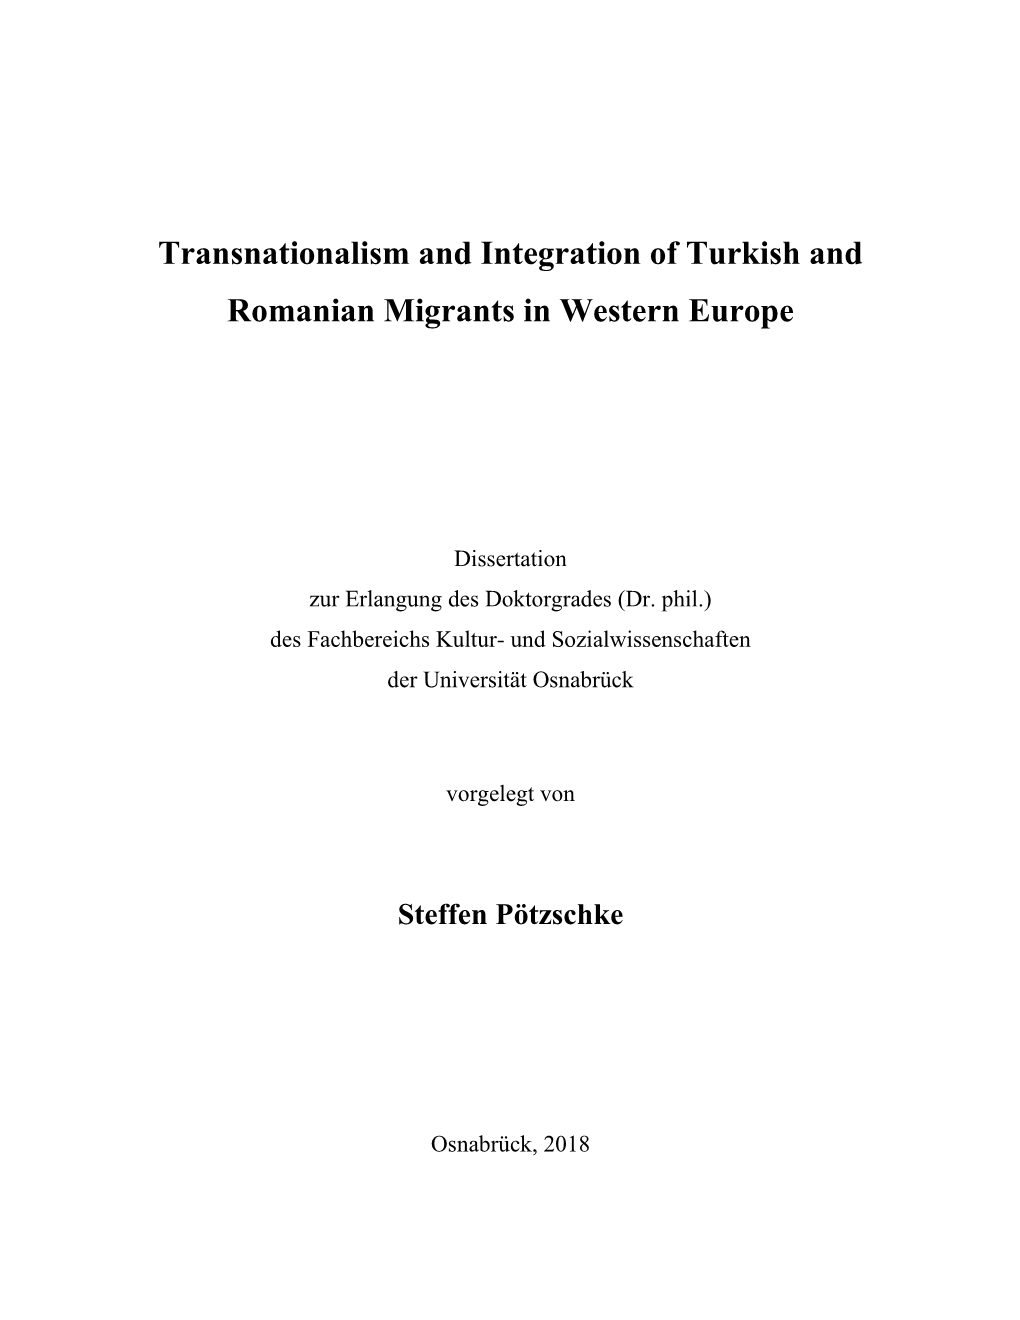 Transnationalism and Integration of Turkish and Romanian Migrants in Western Europe